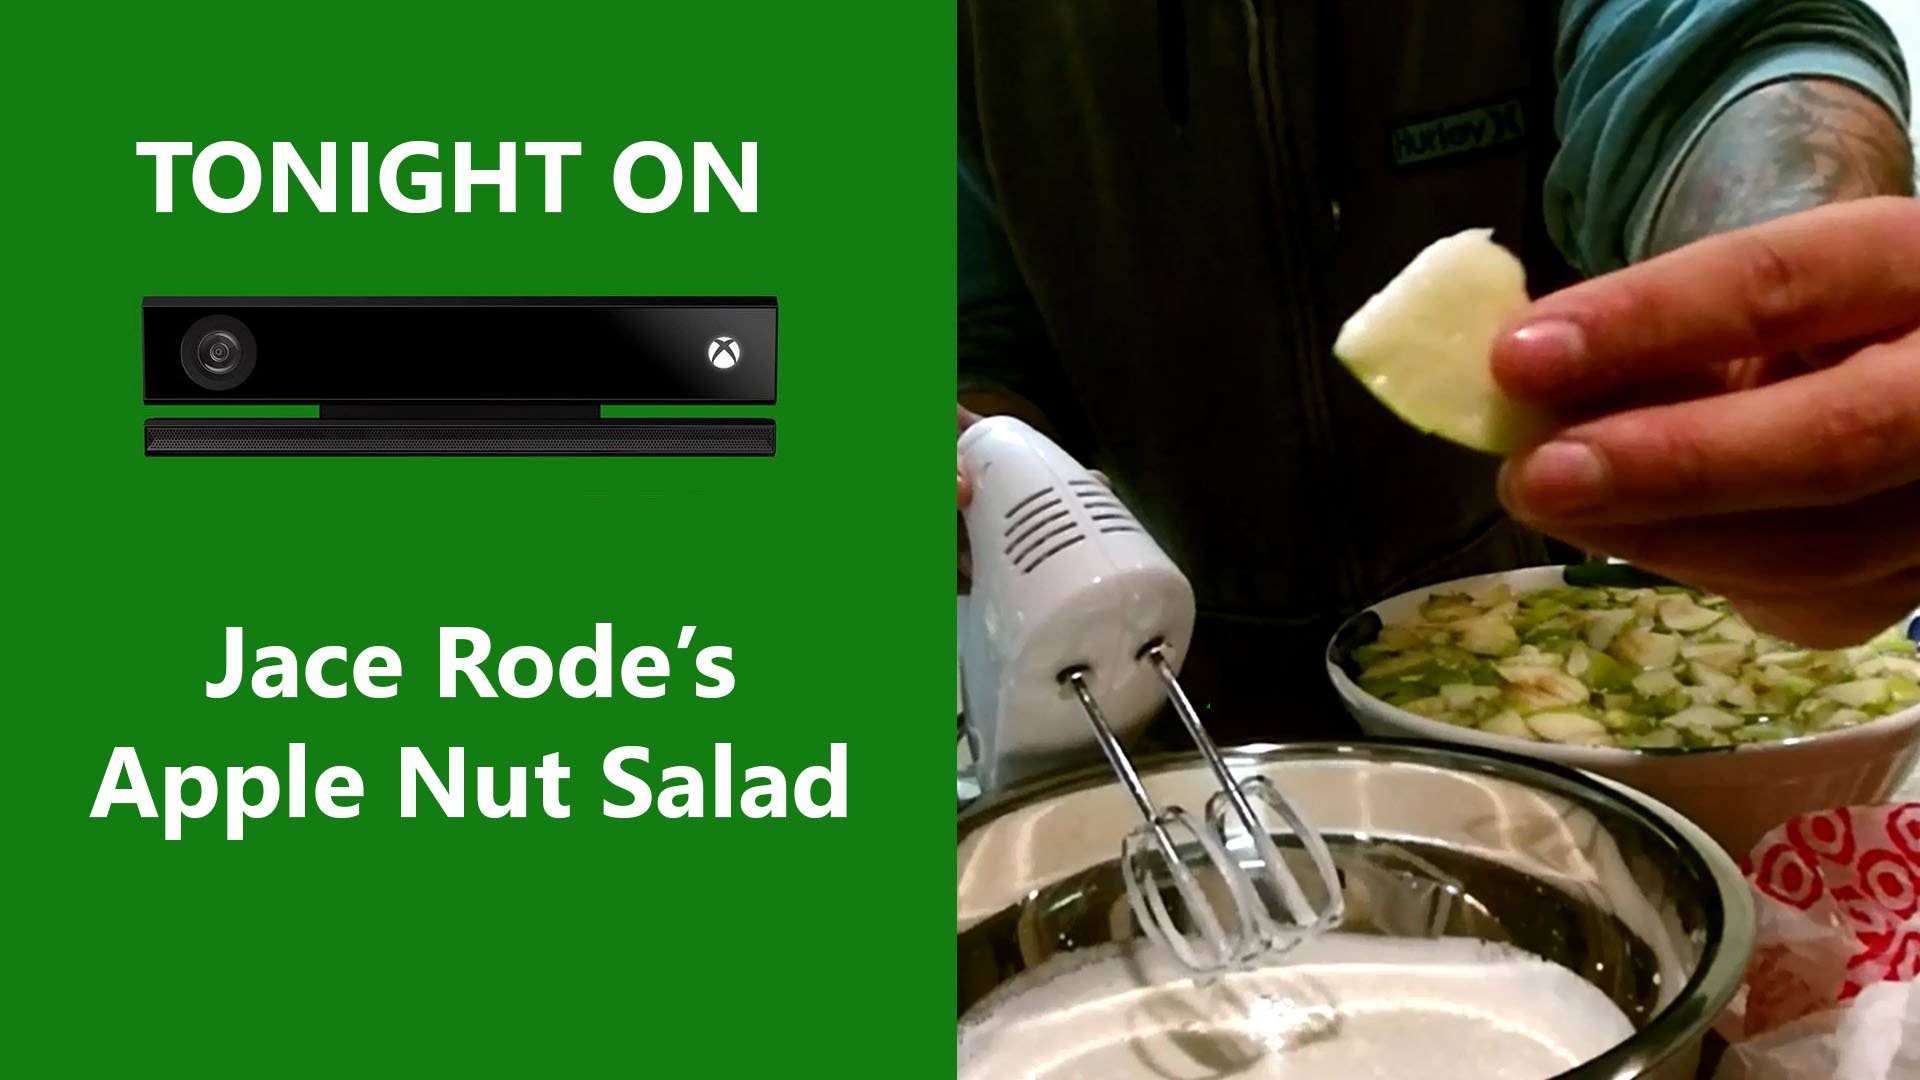 Tonight On Kinect: Jace Rode uses his Xbox One to record a cooking show